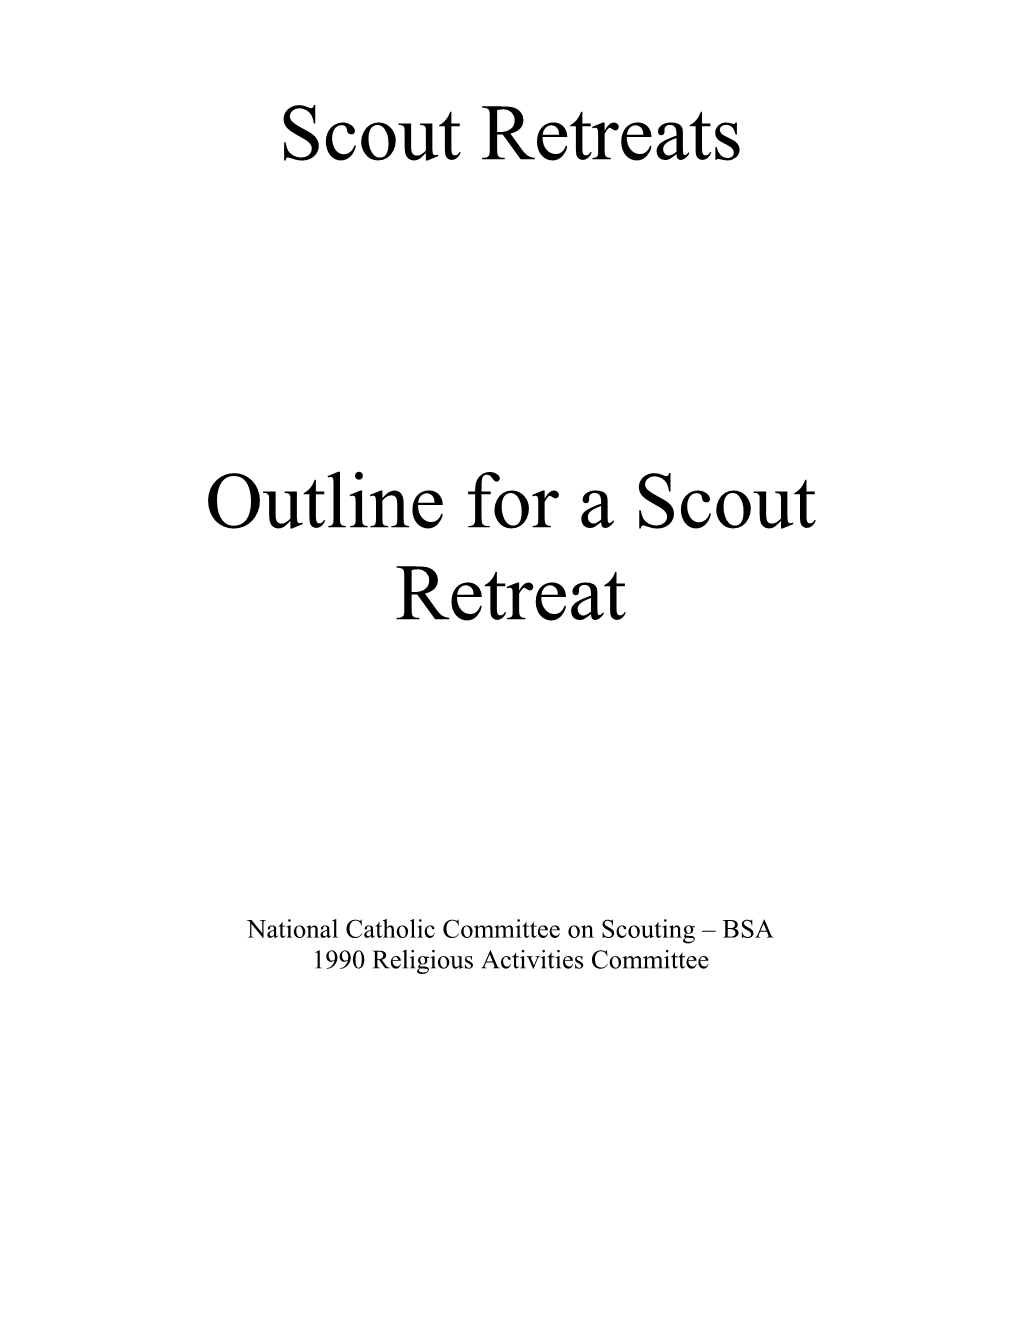 Outline for a Scout Retreat